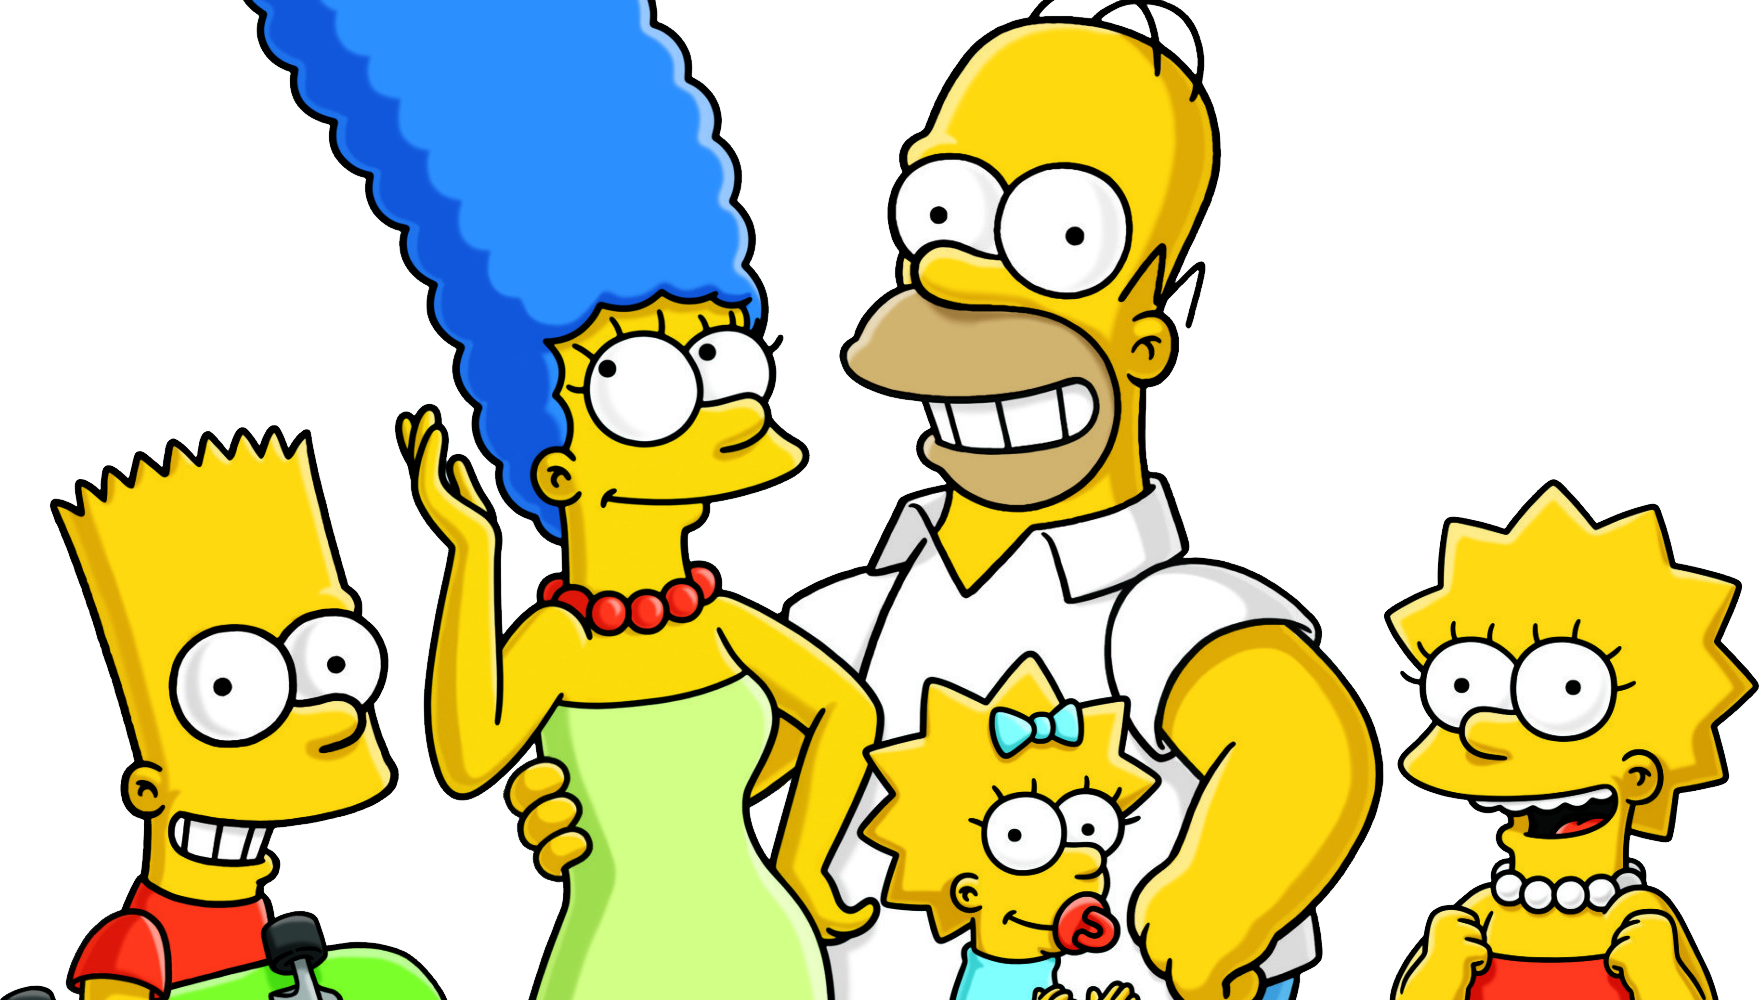 The Simpsons PNG High Quality Image